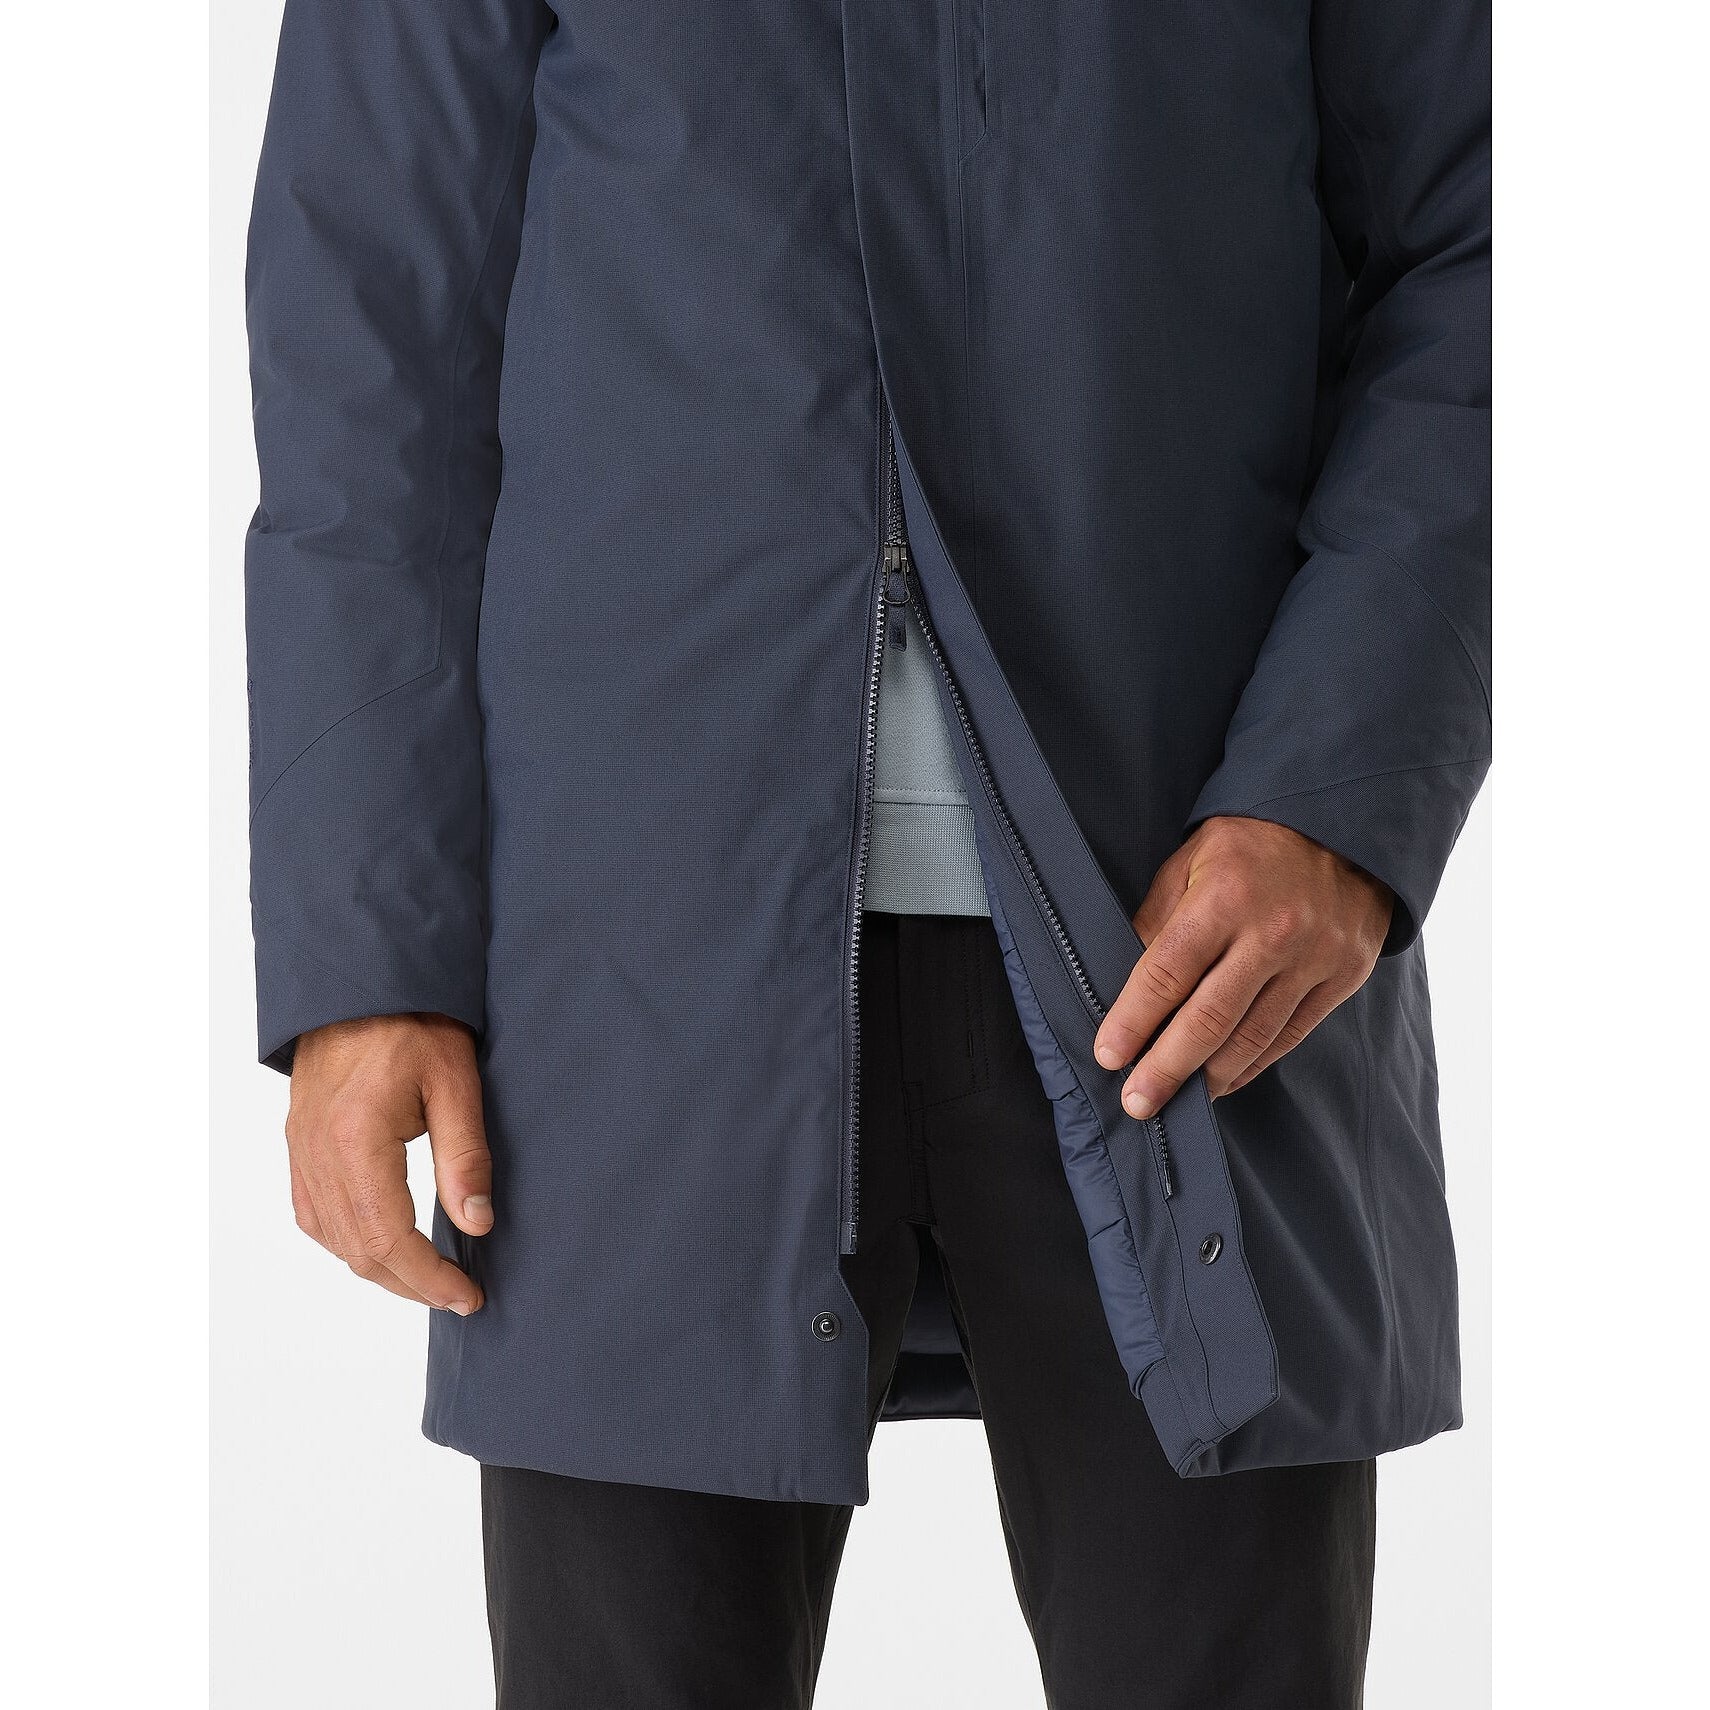 Want to buy ARC'TERYX THERME SV PARKA WINTER JACKET - BLACK SAPPHIRE ...